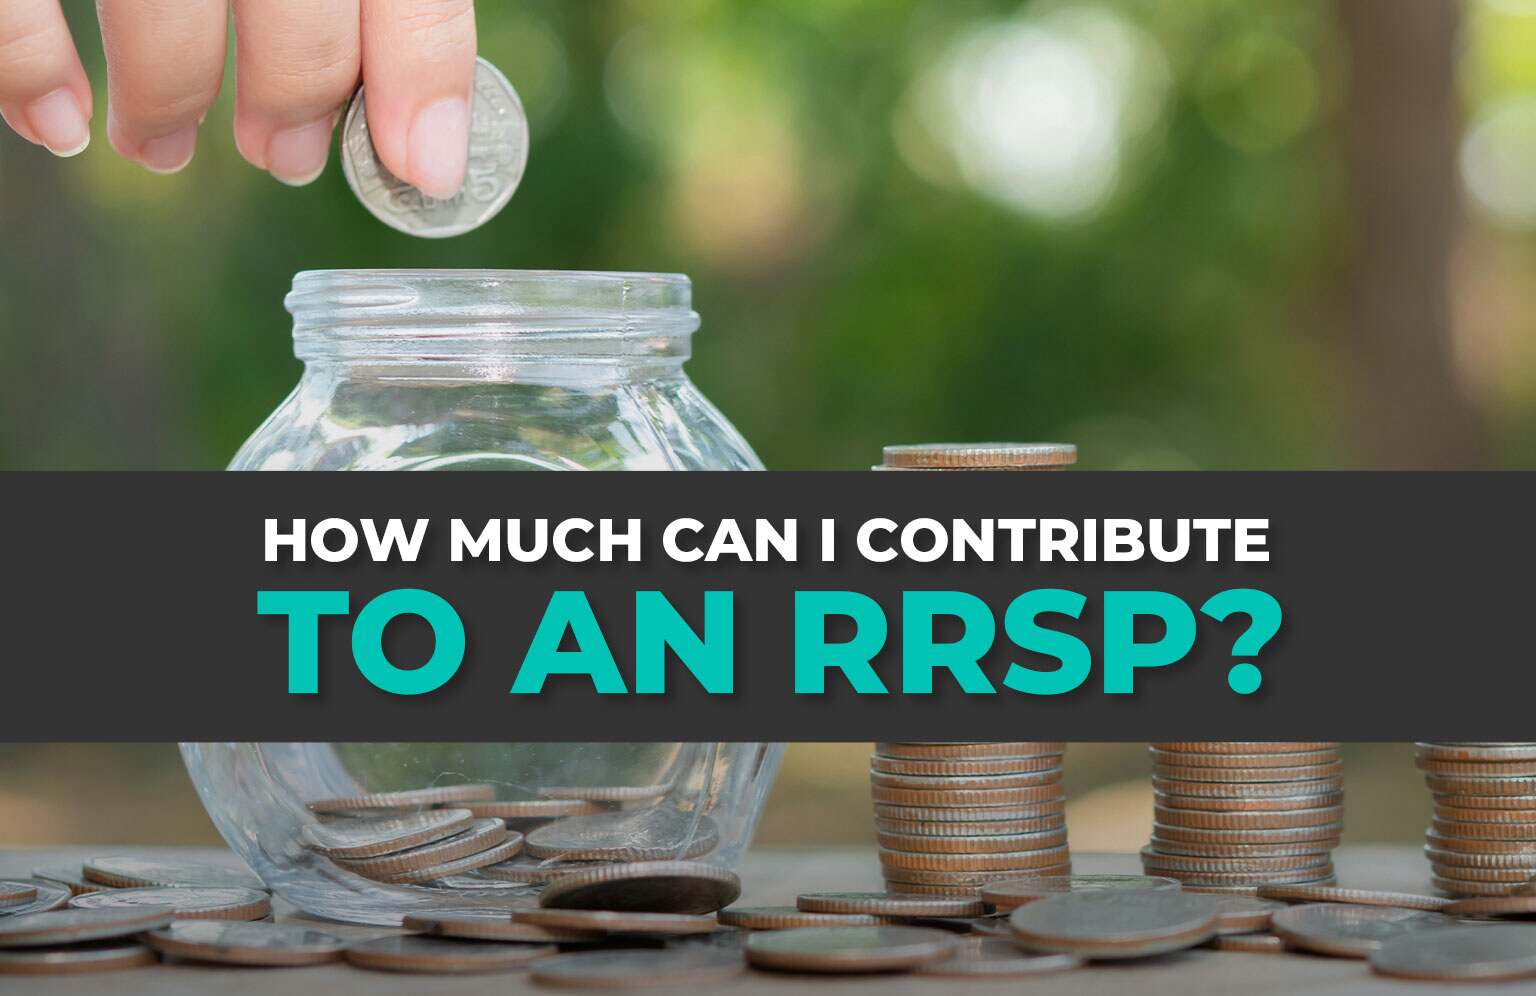 How much can I contribute to an RRSP